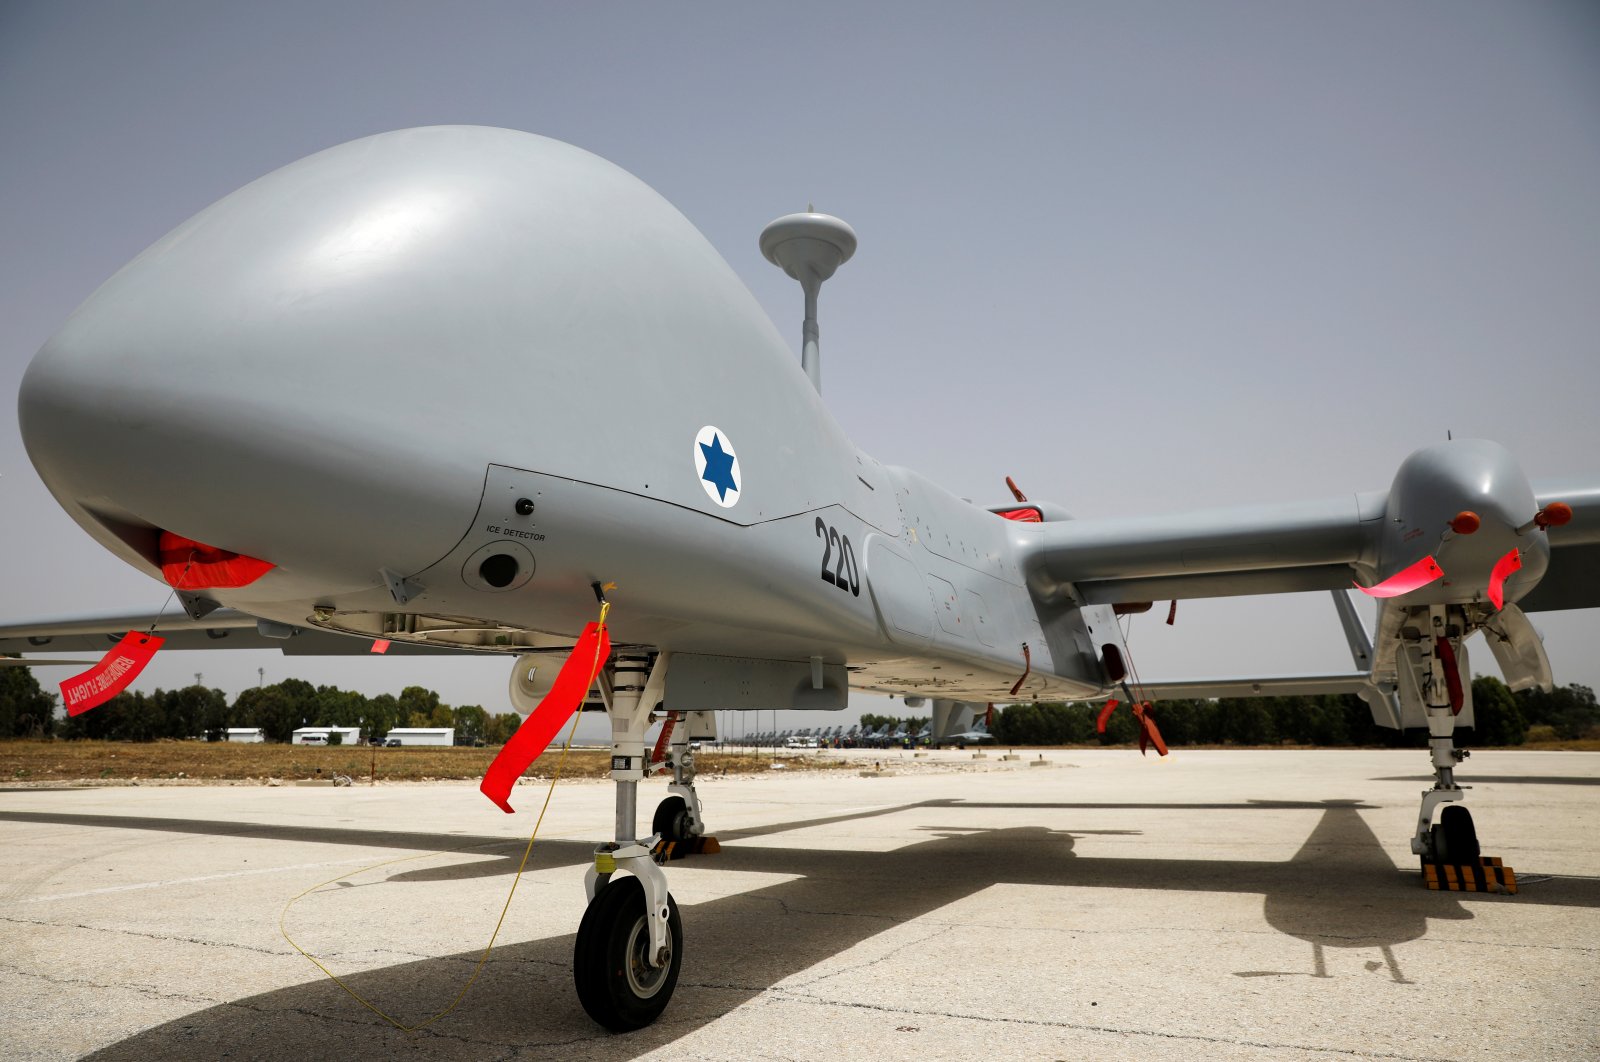 A drone is seen on display during the International Convention of Air Force Commanders, at the Tel Nof air force base in central Israel, May 23, 2018. (Reuters Photo)